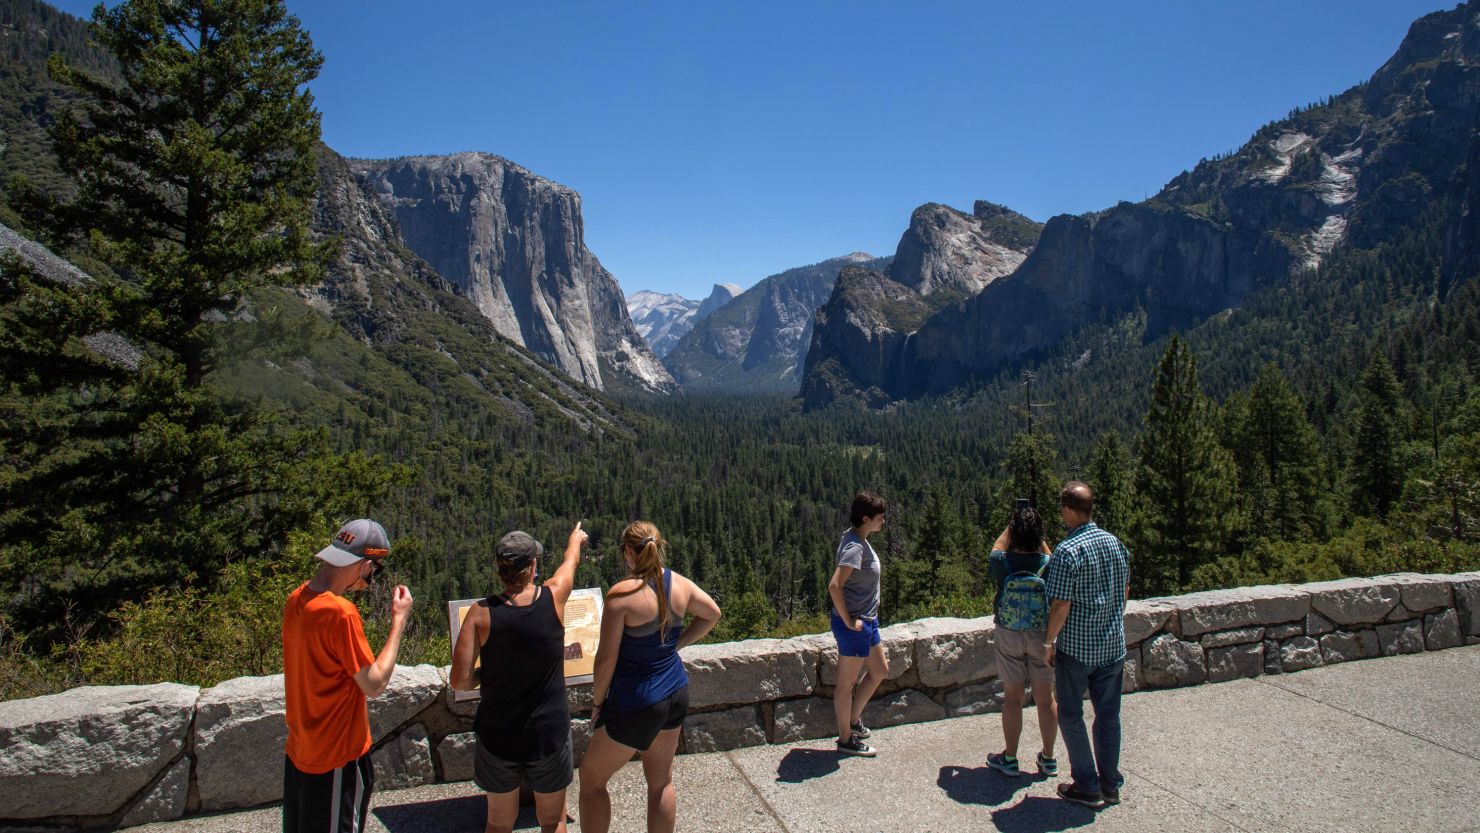 The entrance fee for national parks like Yosemite in California are waived on Wednesday.